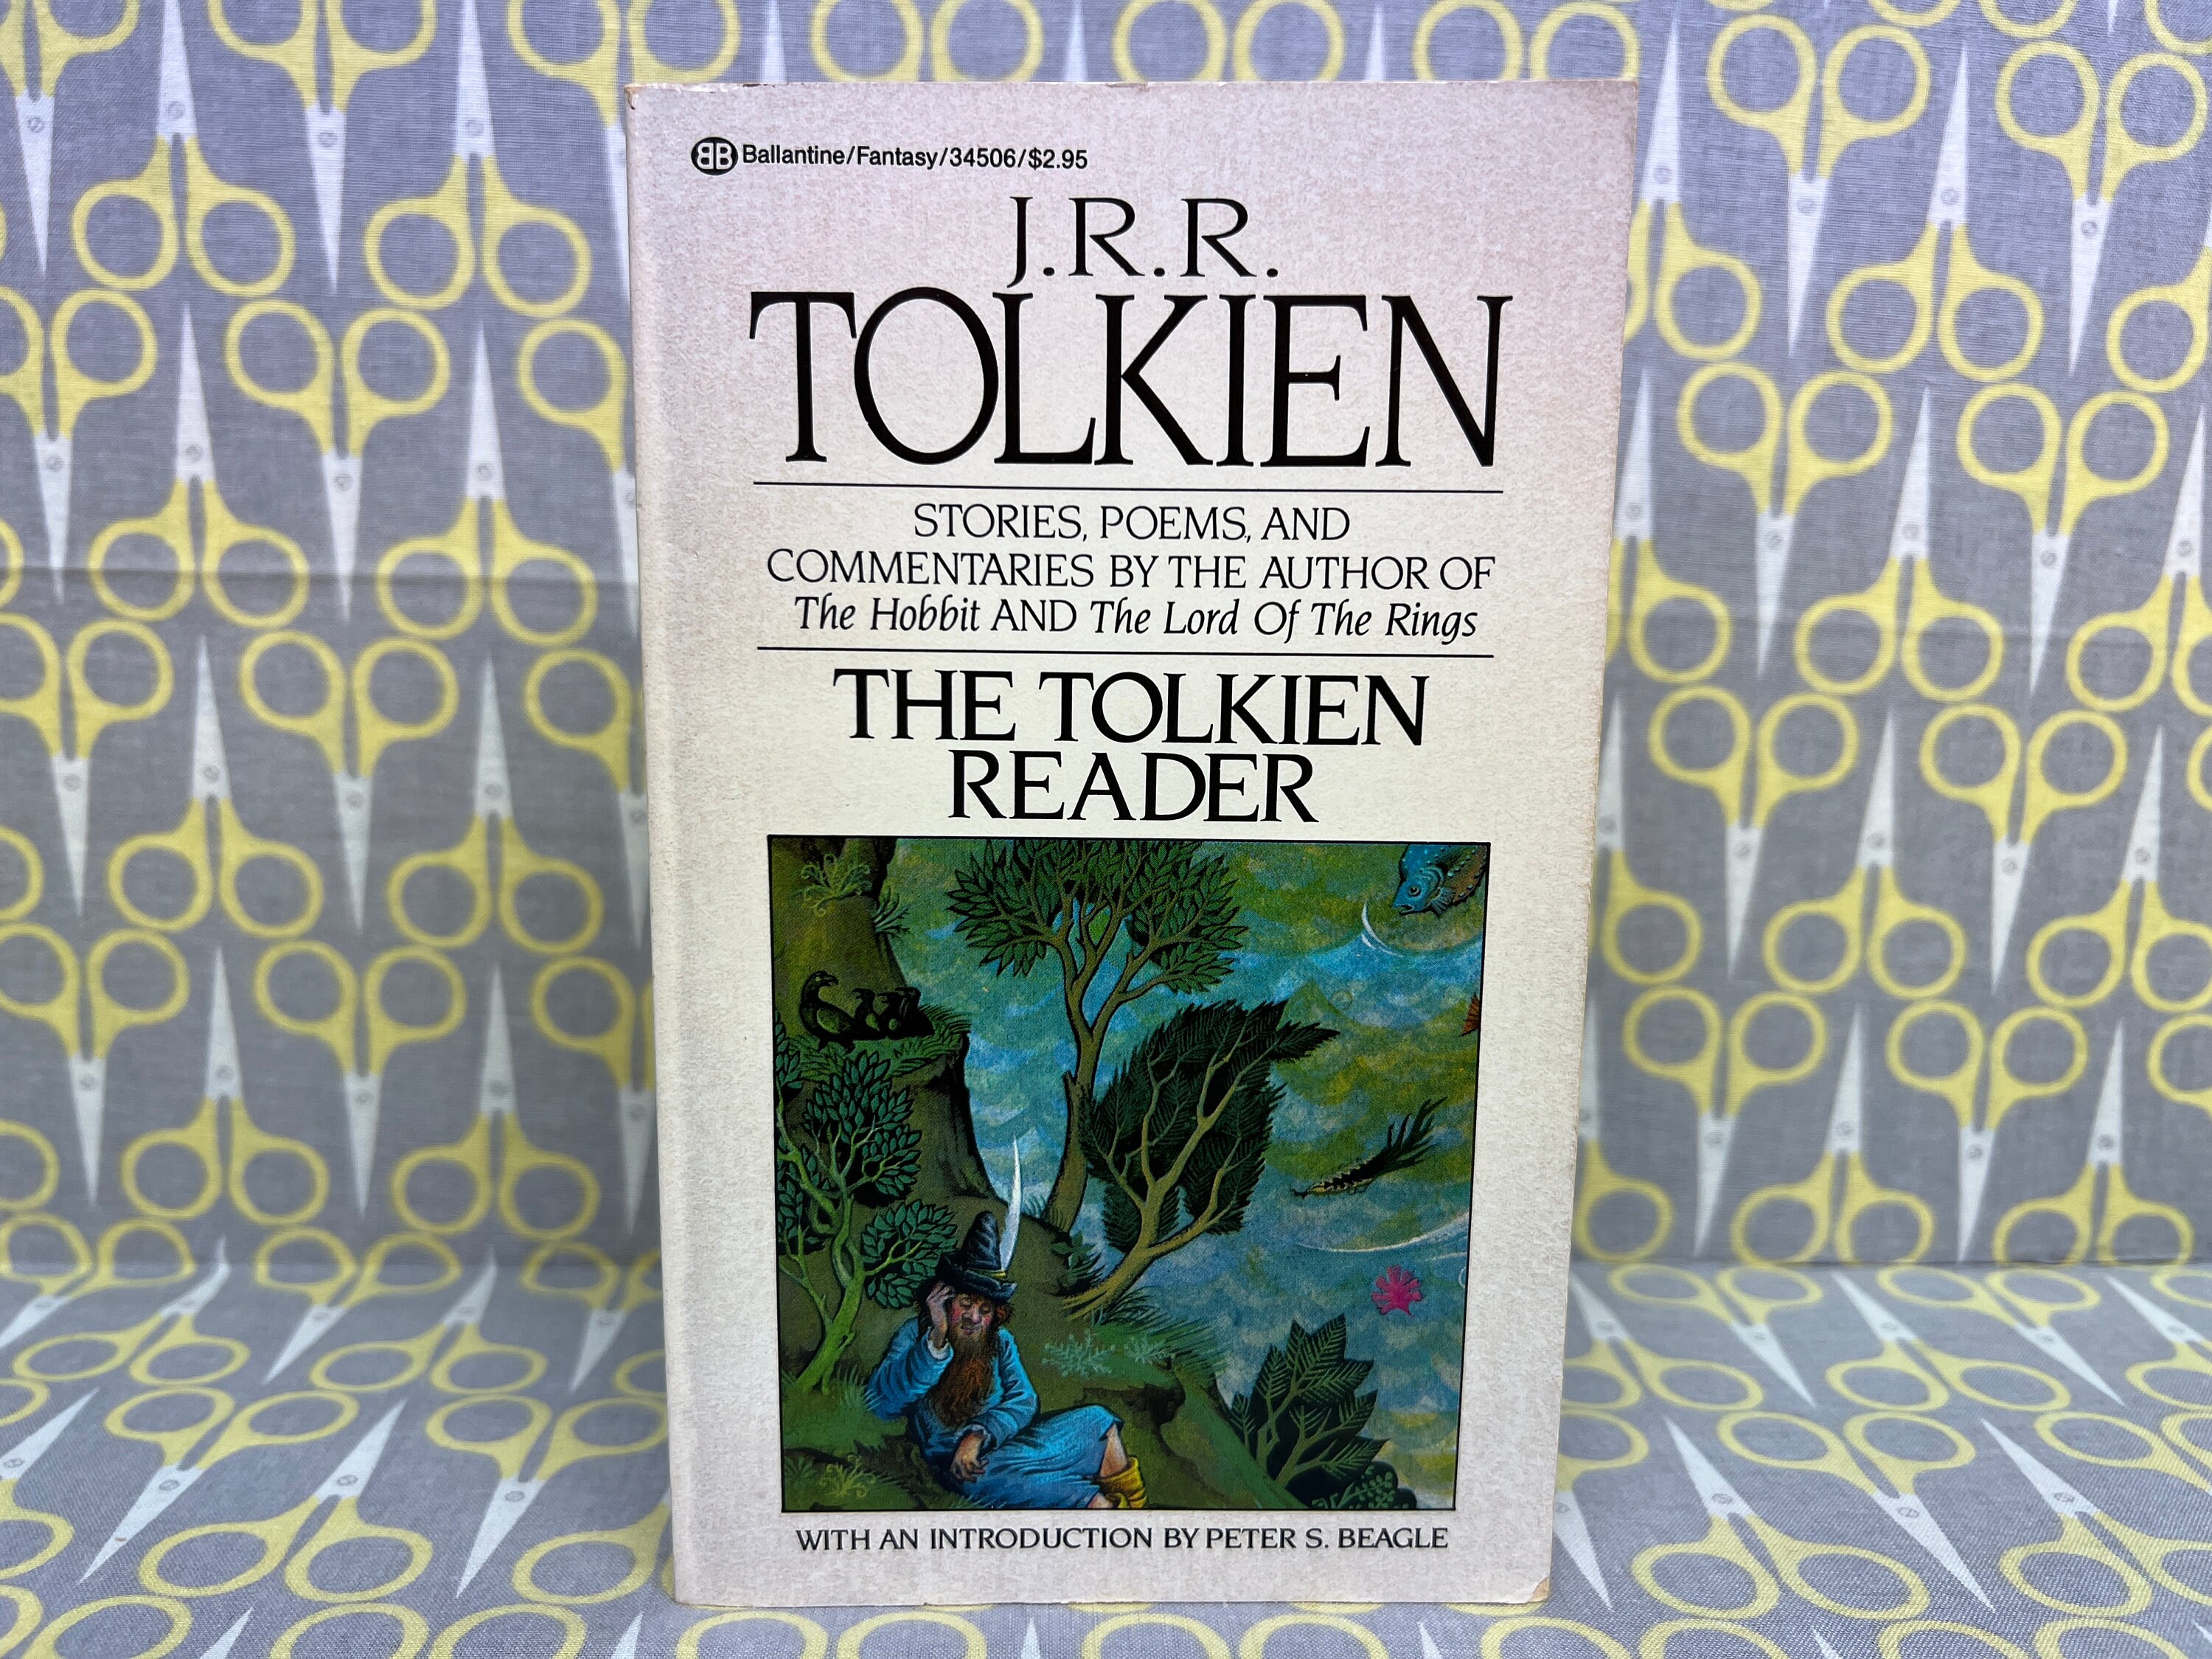 Tolkien Illustrated Editions: The Lord of the Rings Illustrated (Hardcover)  - Walmart.com